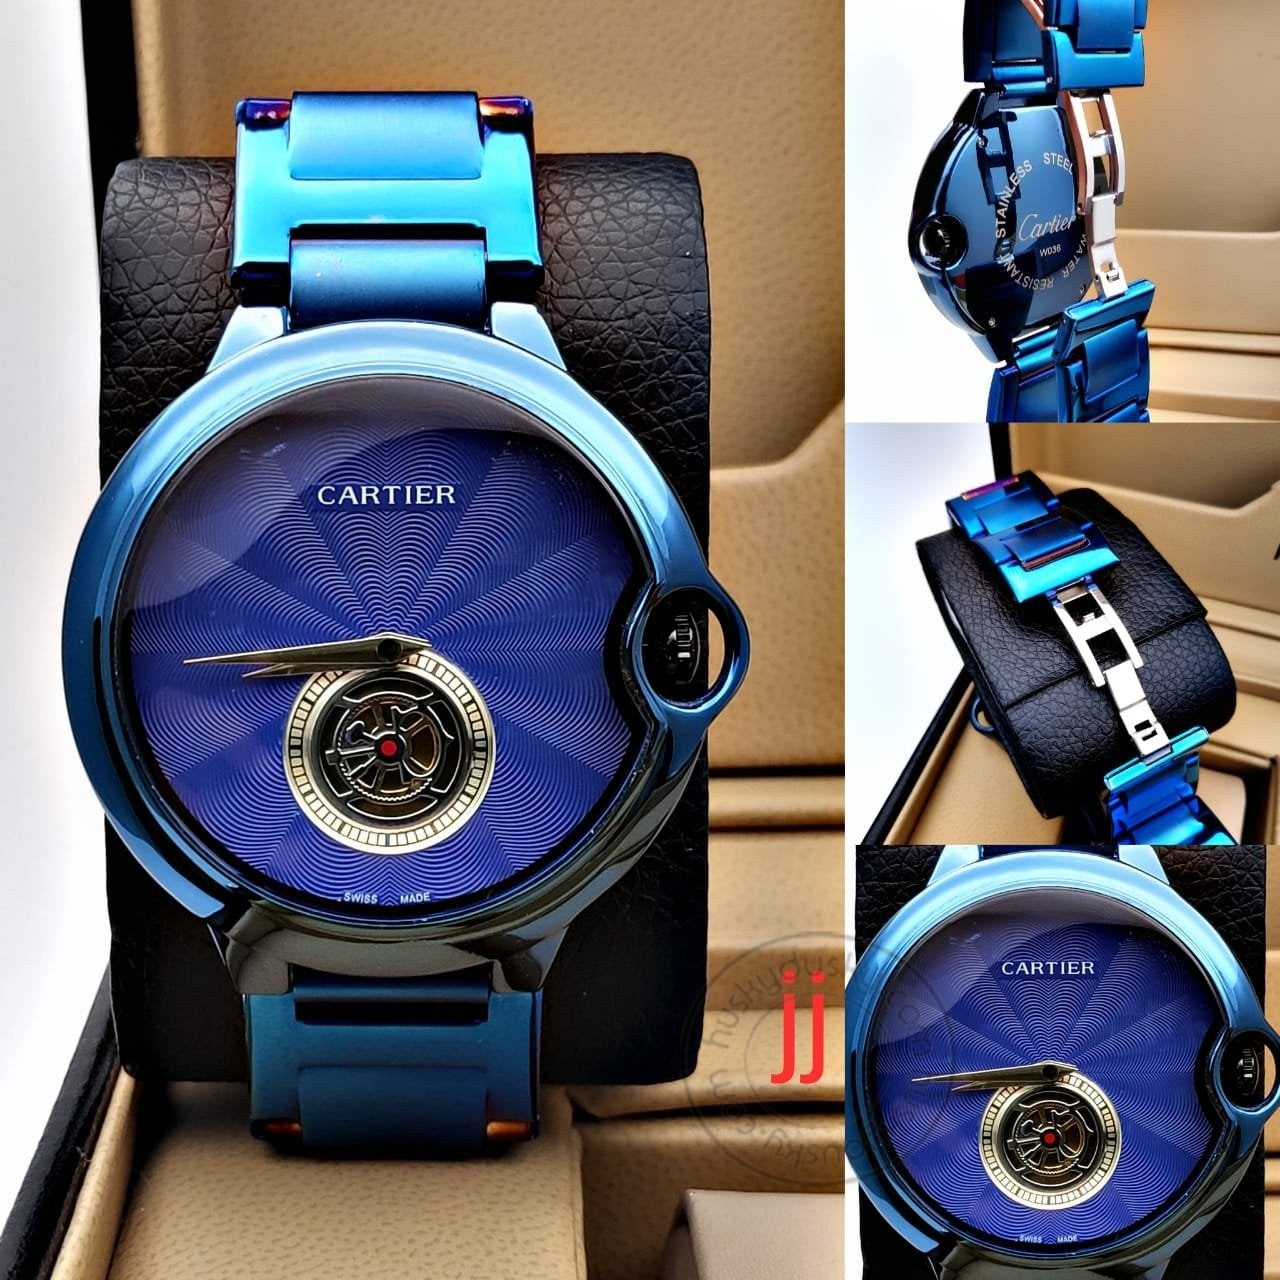 Cartier Full Blue Metal Men's Watch For Man CRTR-124 Best Gift For Man Formal Casual Stylish